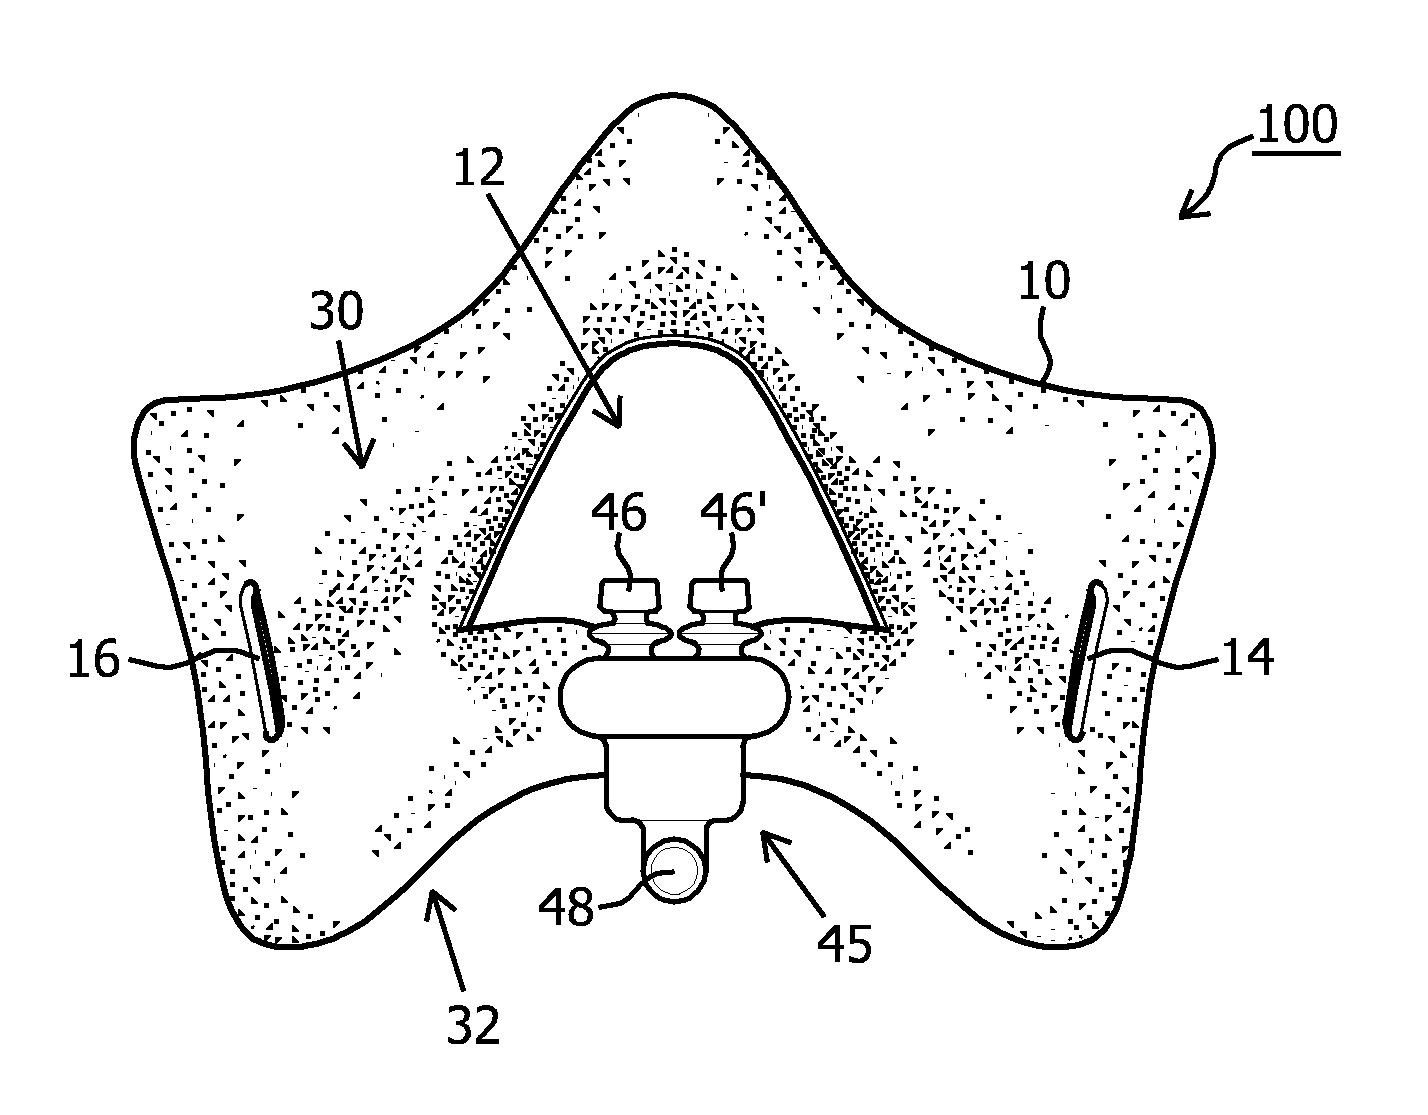 Wearable medical support for delivery of fluids to the nose